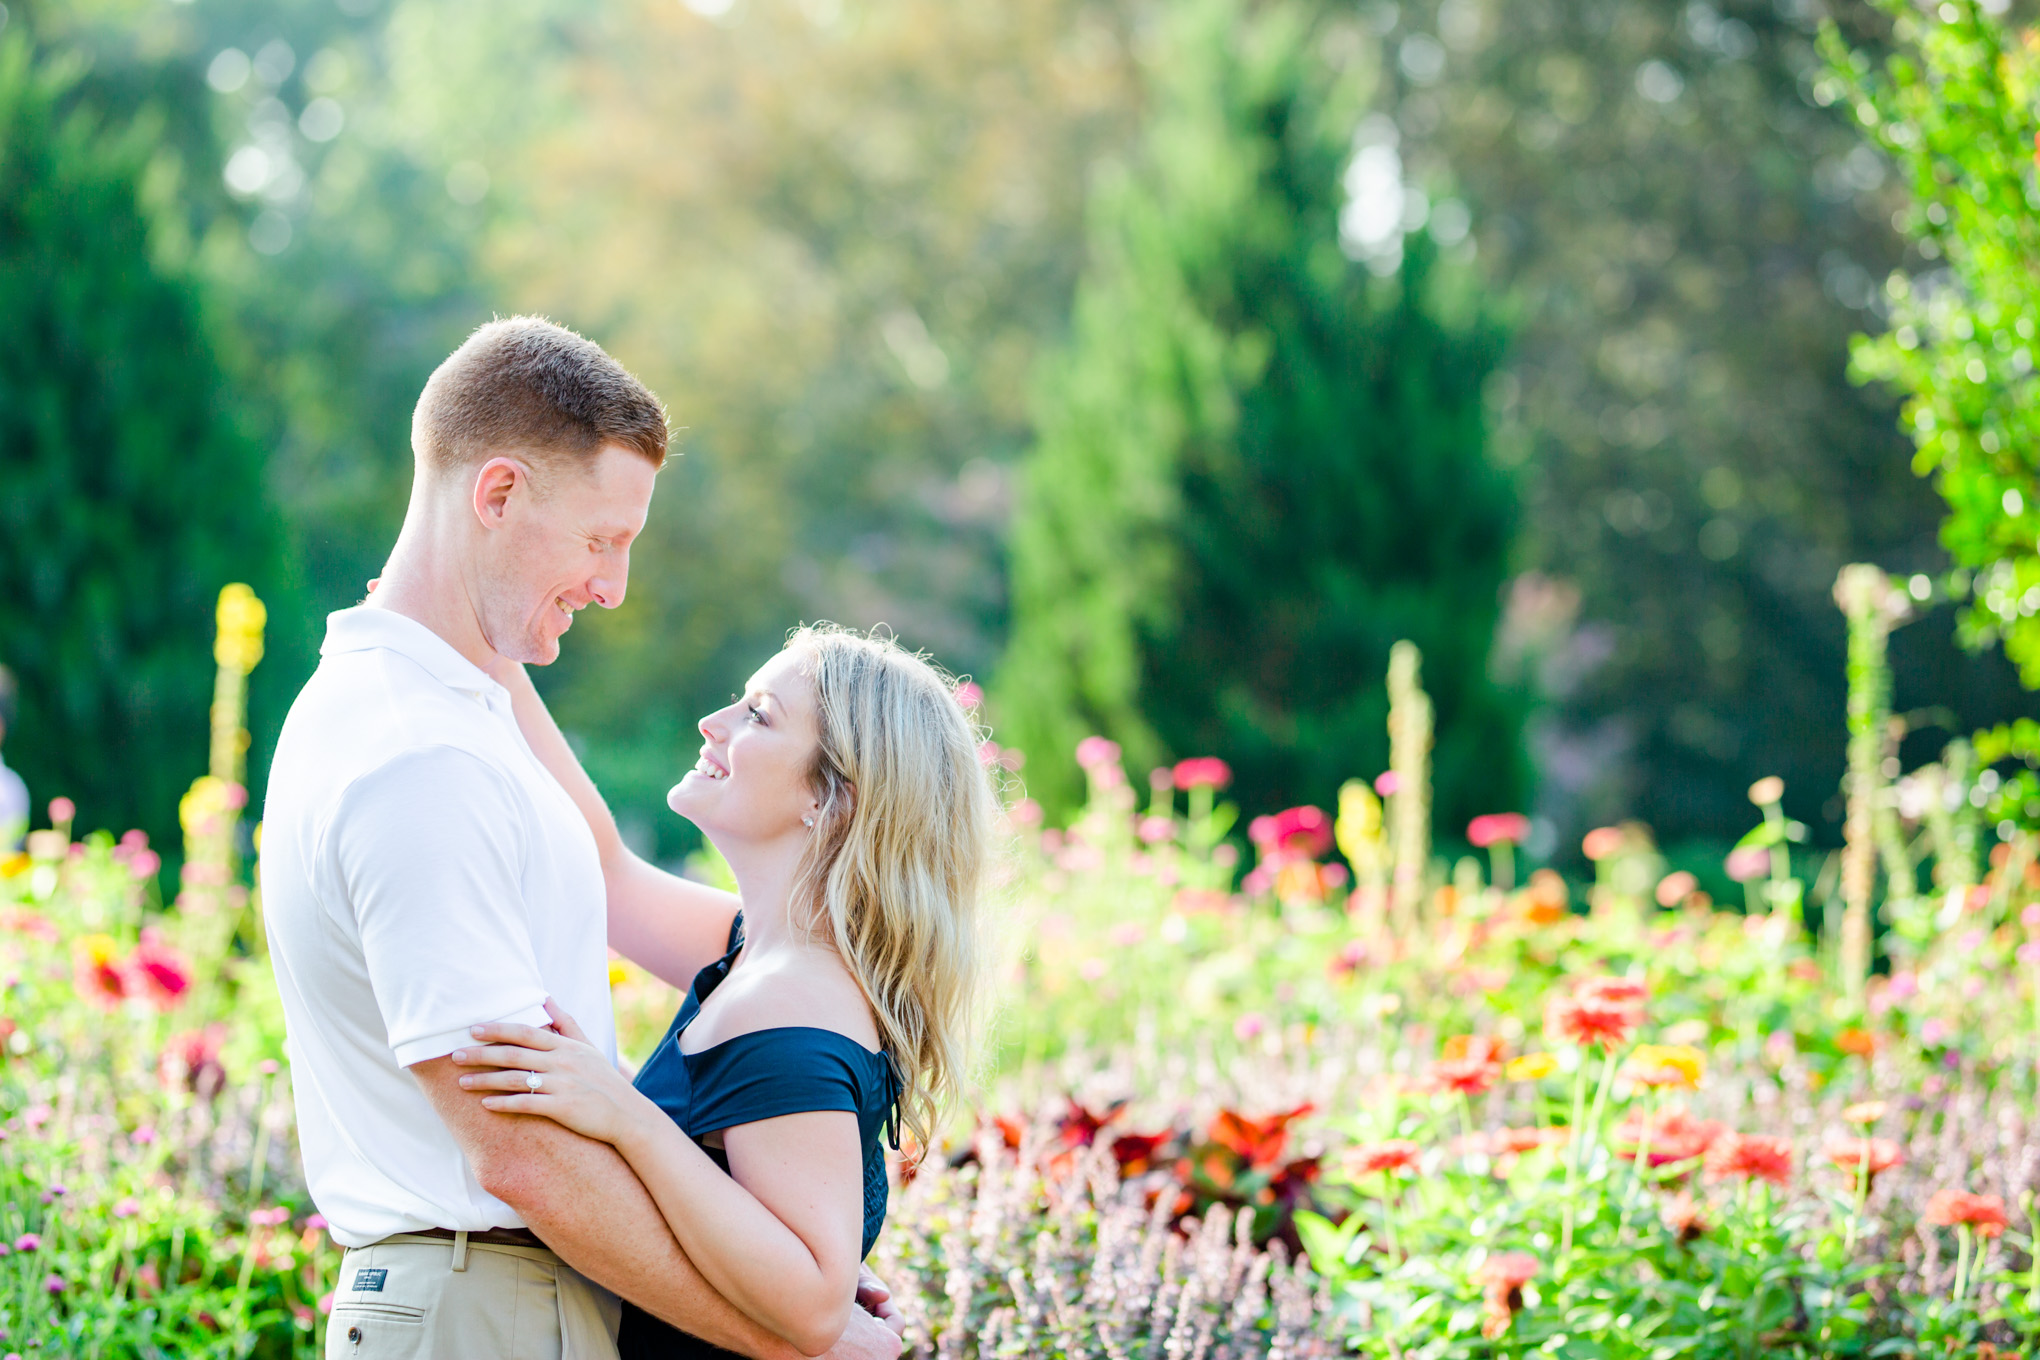 National Cathedral engagement photos, National Cathedral, D.C. engagement photos, classic engagement portraits, Washington National Cathedral, natural light engagement photos, D.C. engagement photographer, Rachel E.H. Photography, sunrise engagement photos, couple standing in garden